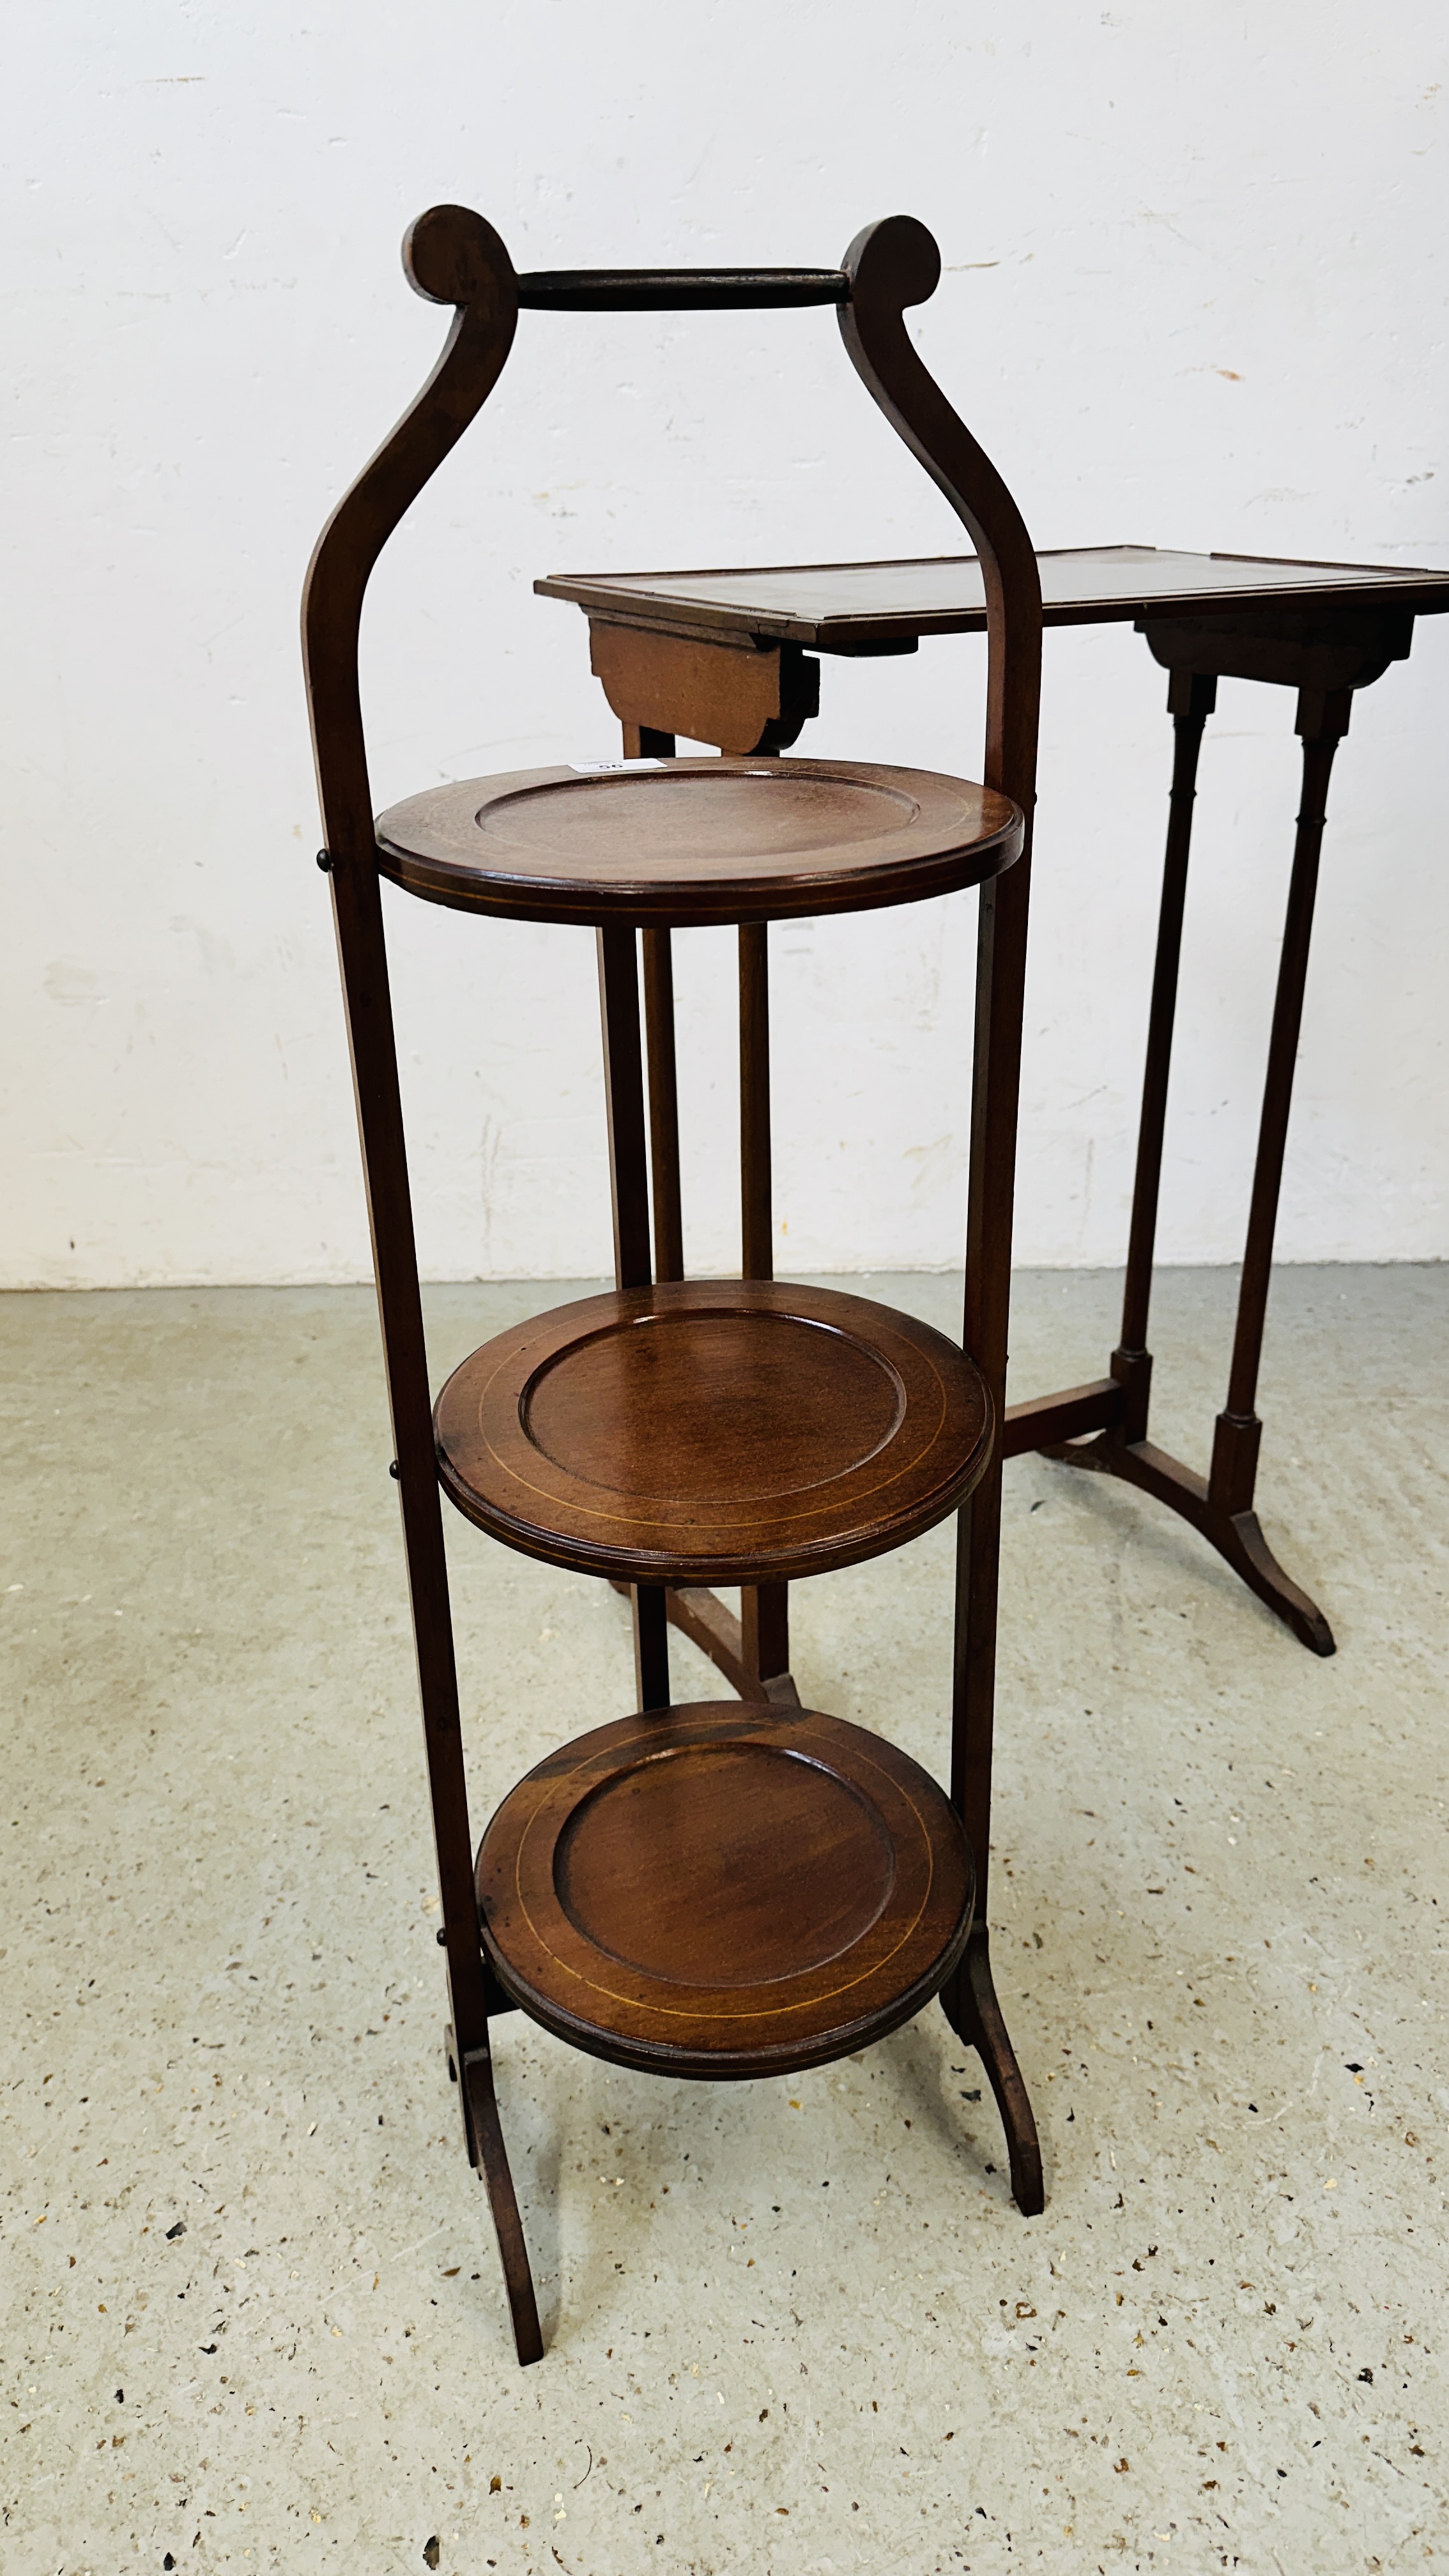 A FOLDING CAKE STAND ALONG WITH MAHOGNY OCCASIONAL TABLE, ONE OF A QUATTETO SET.